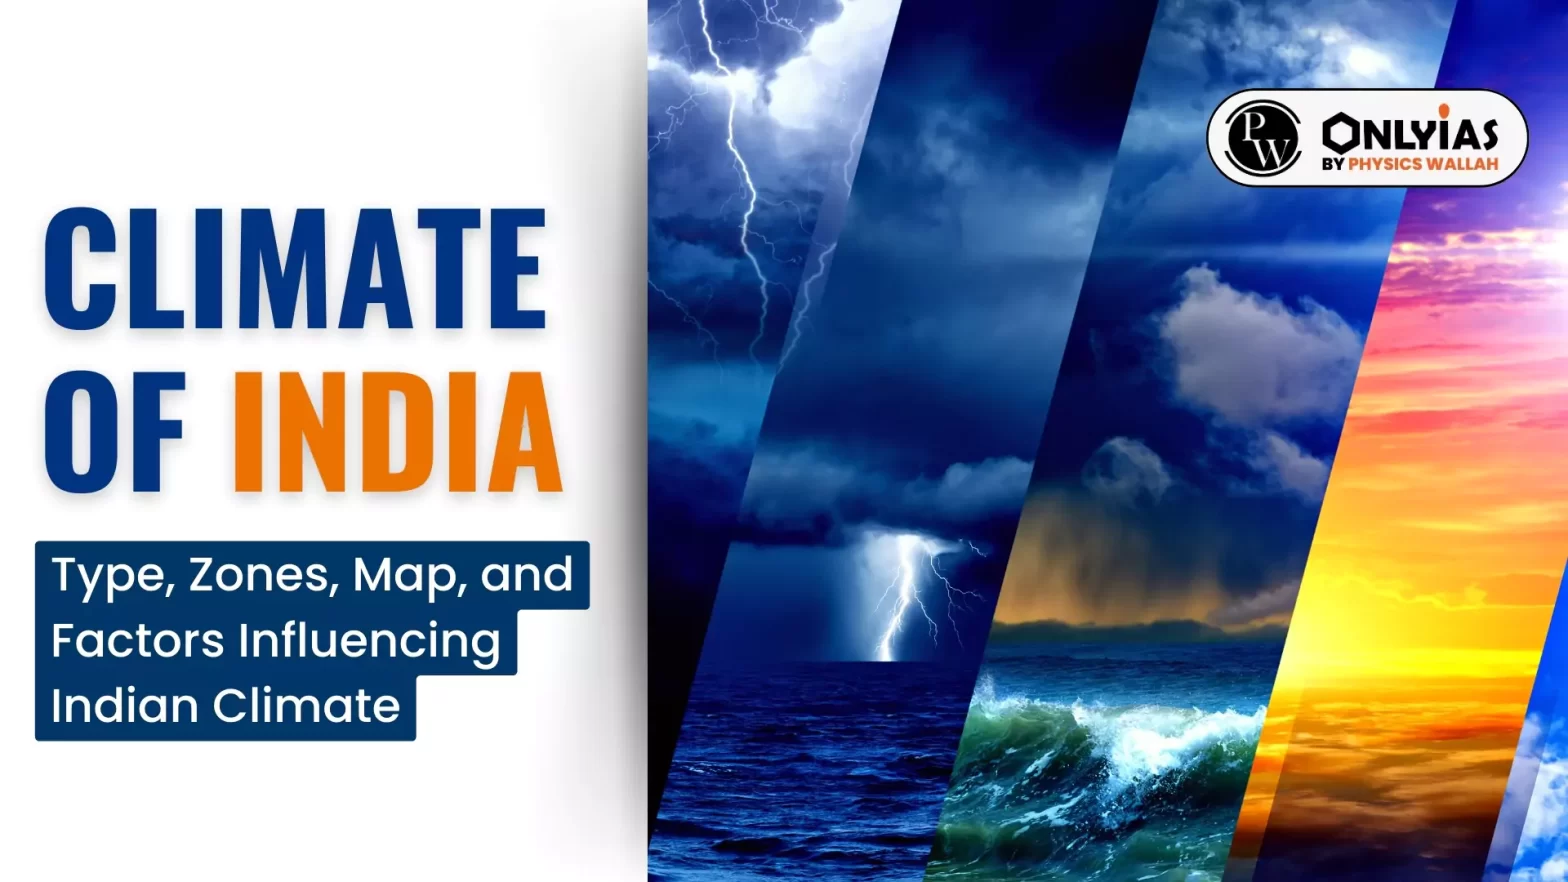 Climate of India: Type, Zones, Map, and Factors Influencing Indian Climate